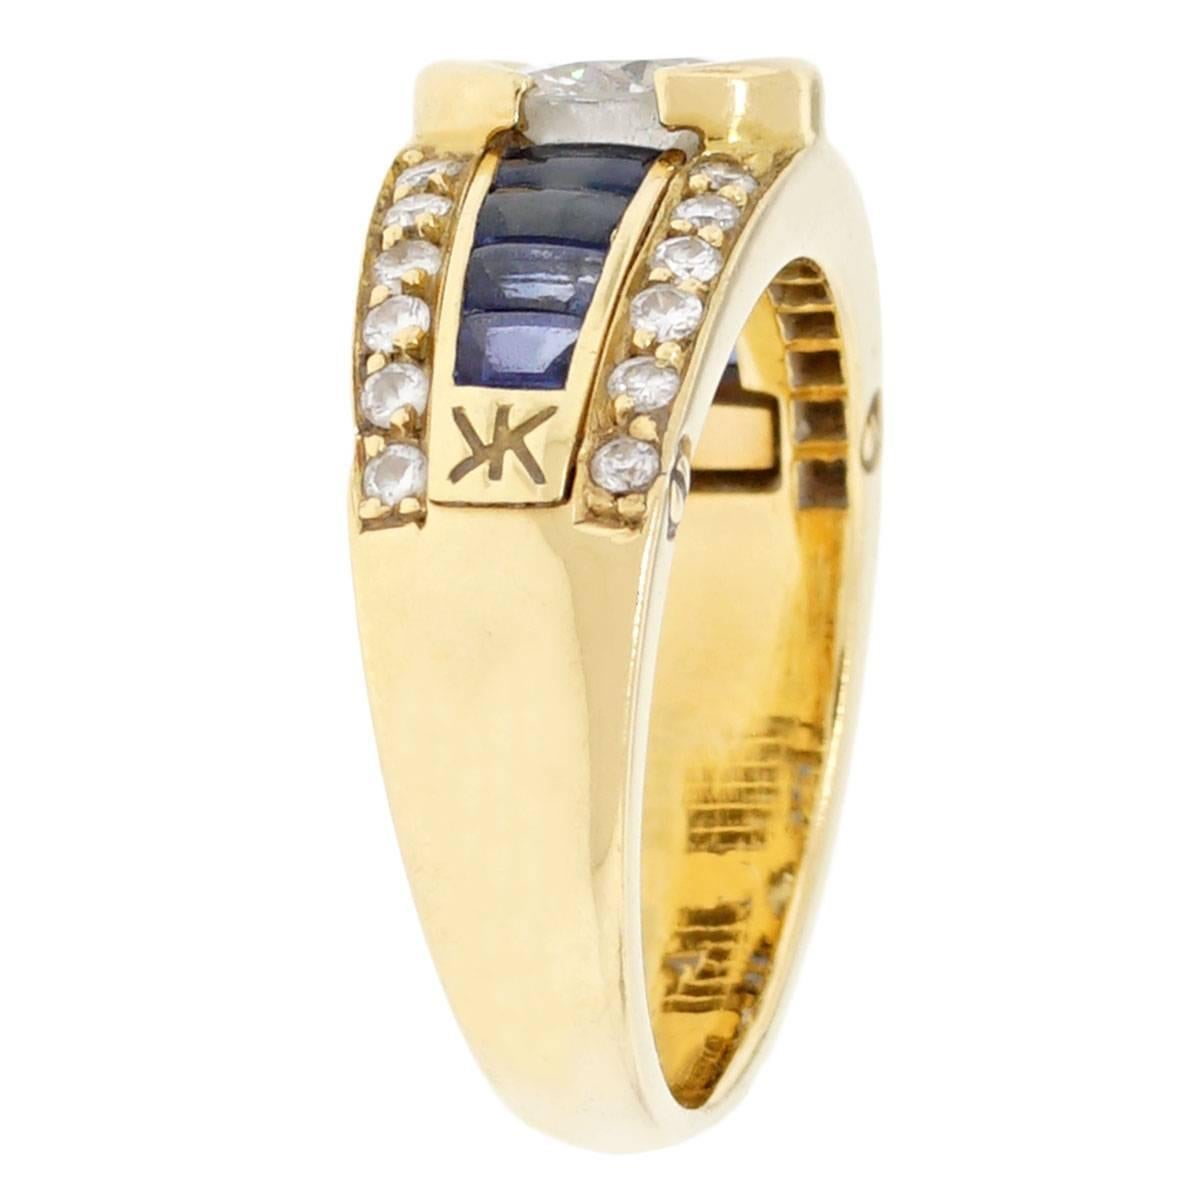 Material: 18k yellow gold
Diamond Details: Approximately 0.80ctw of round brilliant diamonds.
Gemstone Details: 8 sapphires that measure approximately 3.10mm x 2.26mm
Ring Size: 6.5 ( can be sized)
Ring Measurements: 0.80